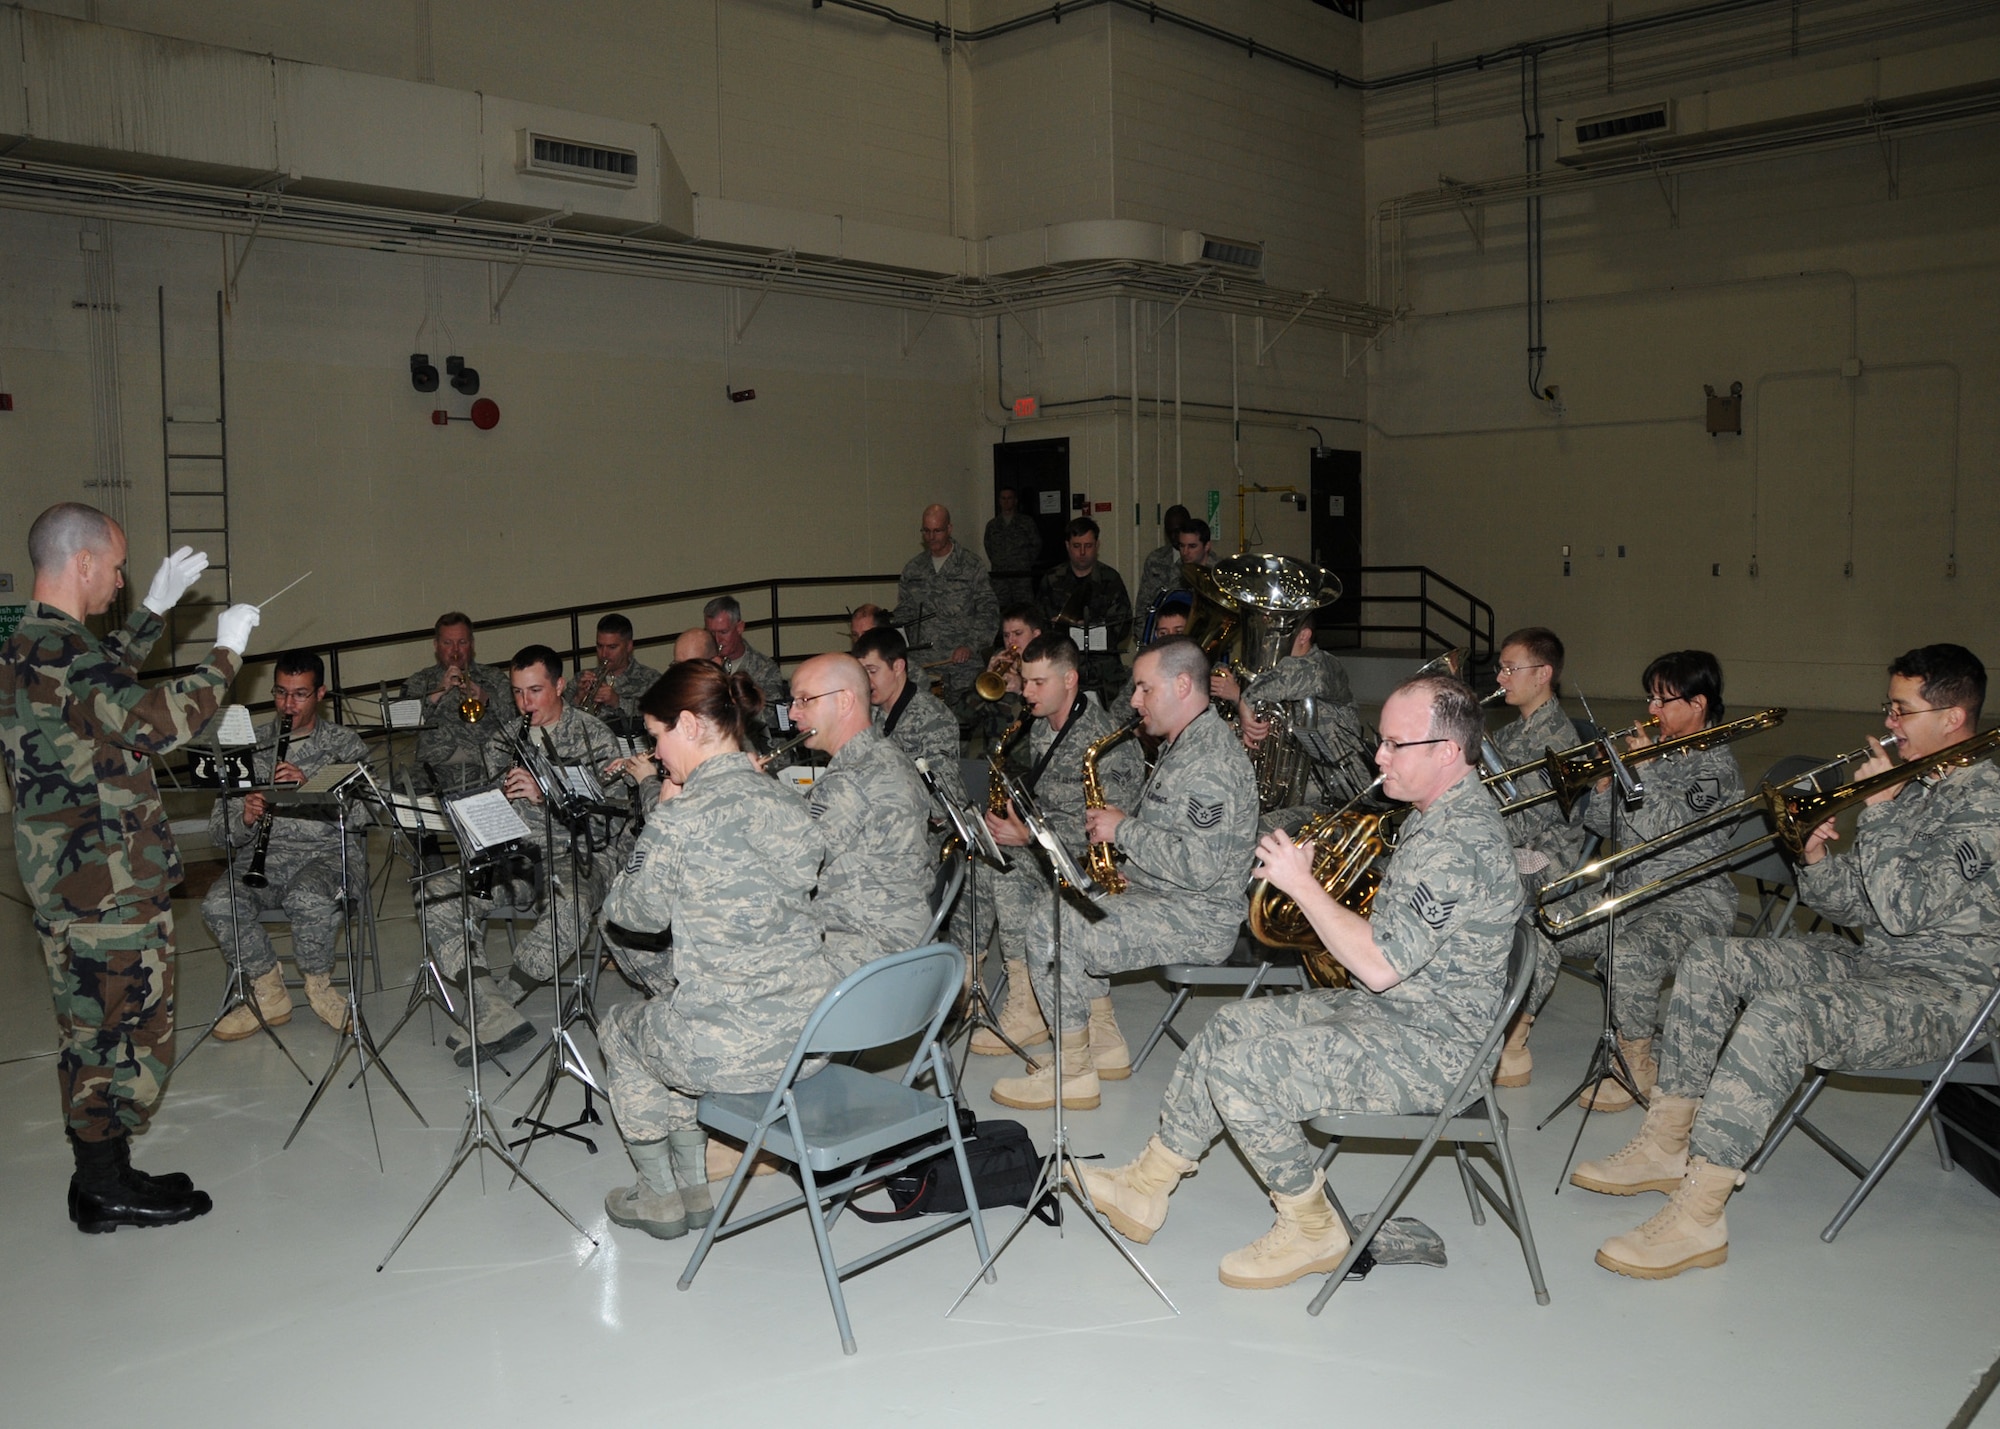 The 571st AF Band of the Central States plays during Col Gregory Champagne's assumption of command ceremony at Whiteman AFB, March 20.  The 571st, located at Lambert ANGB, is directed by Capt. John Arrata.   (U.S. Air Force photo by Master Sgt. Mary-Dale Amison  RELEASED)